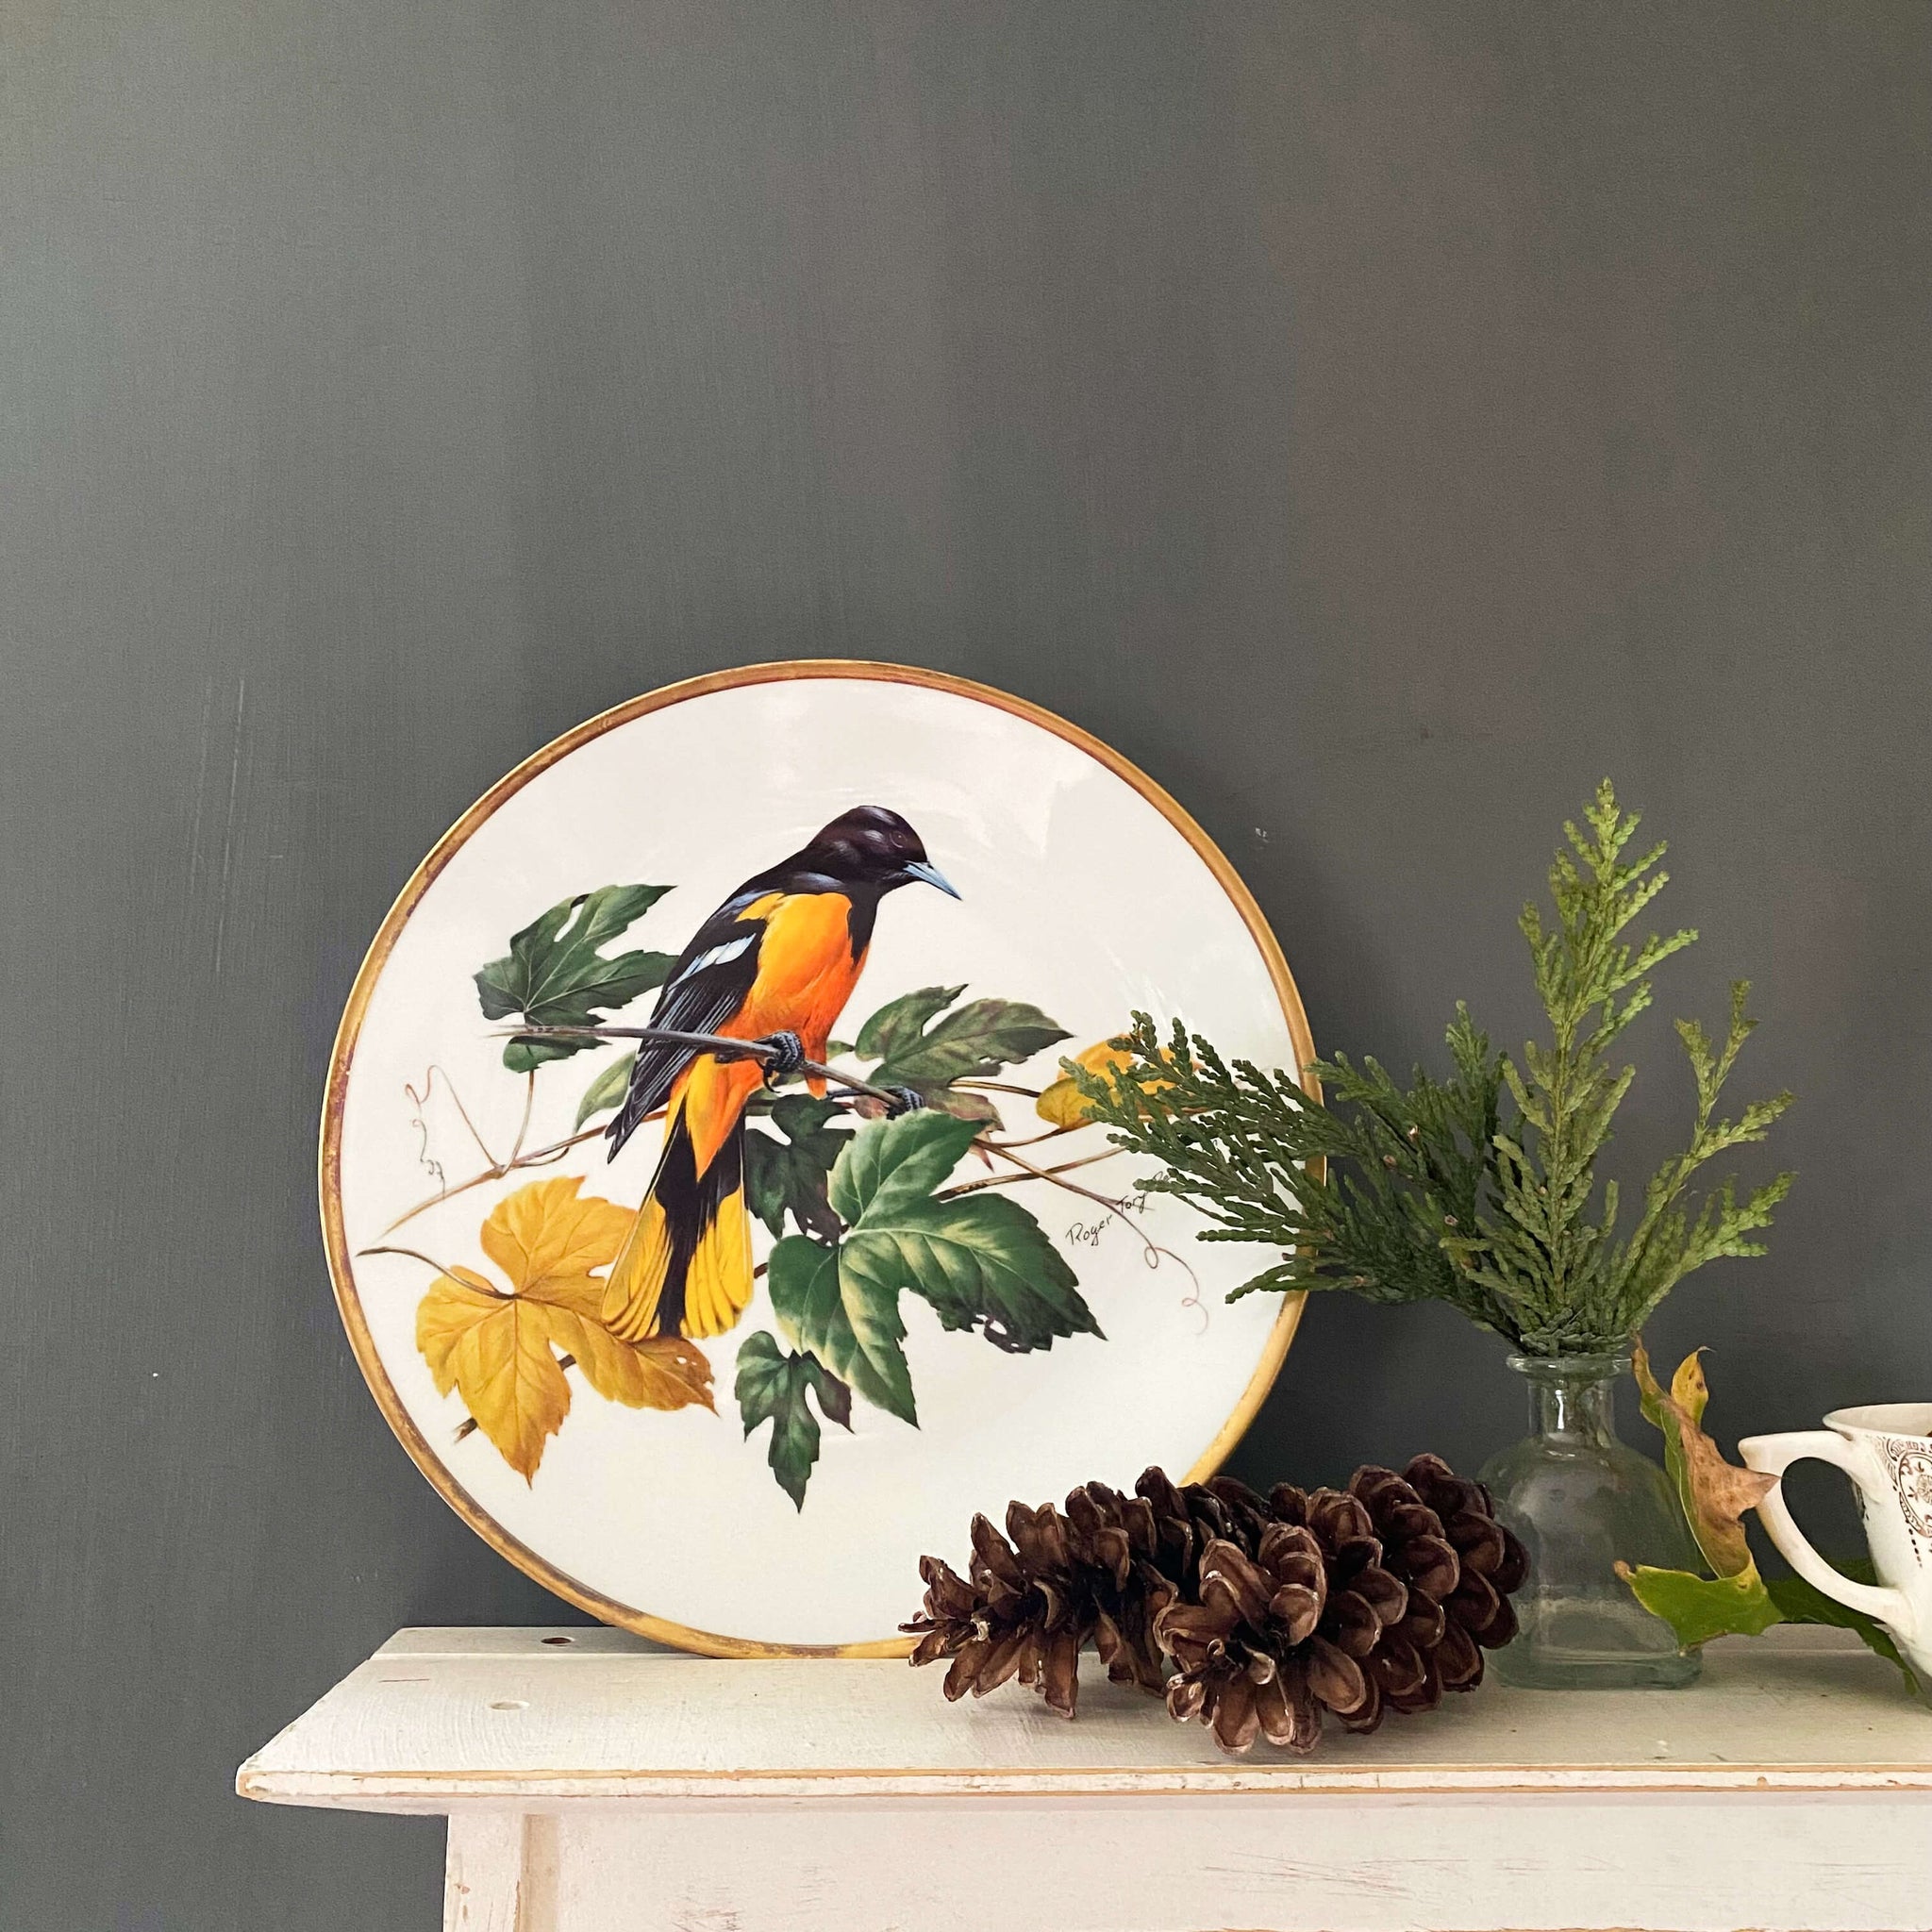 Vintage French Porcelain Bird Plate - Baltimore Oriole by Roger Tory Peterson circa 1981